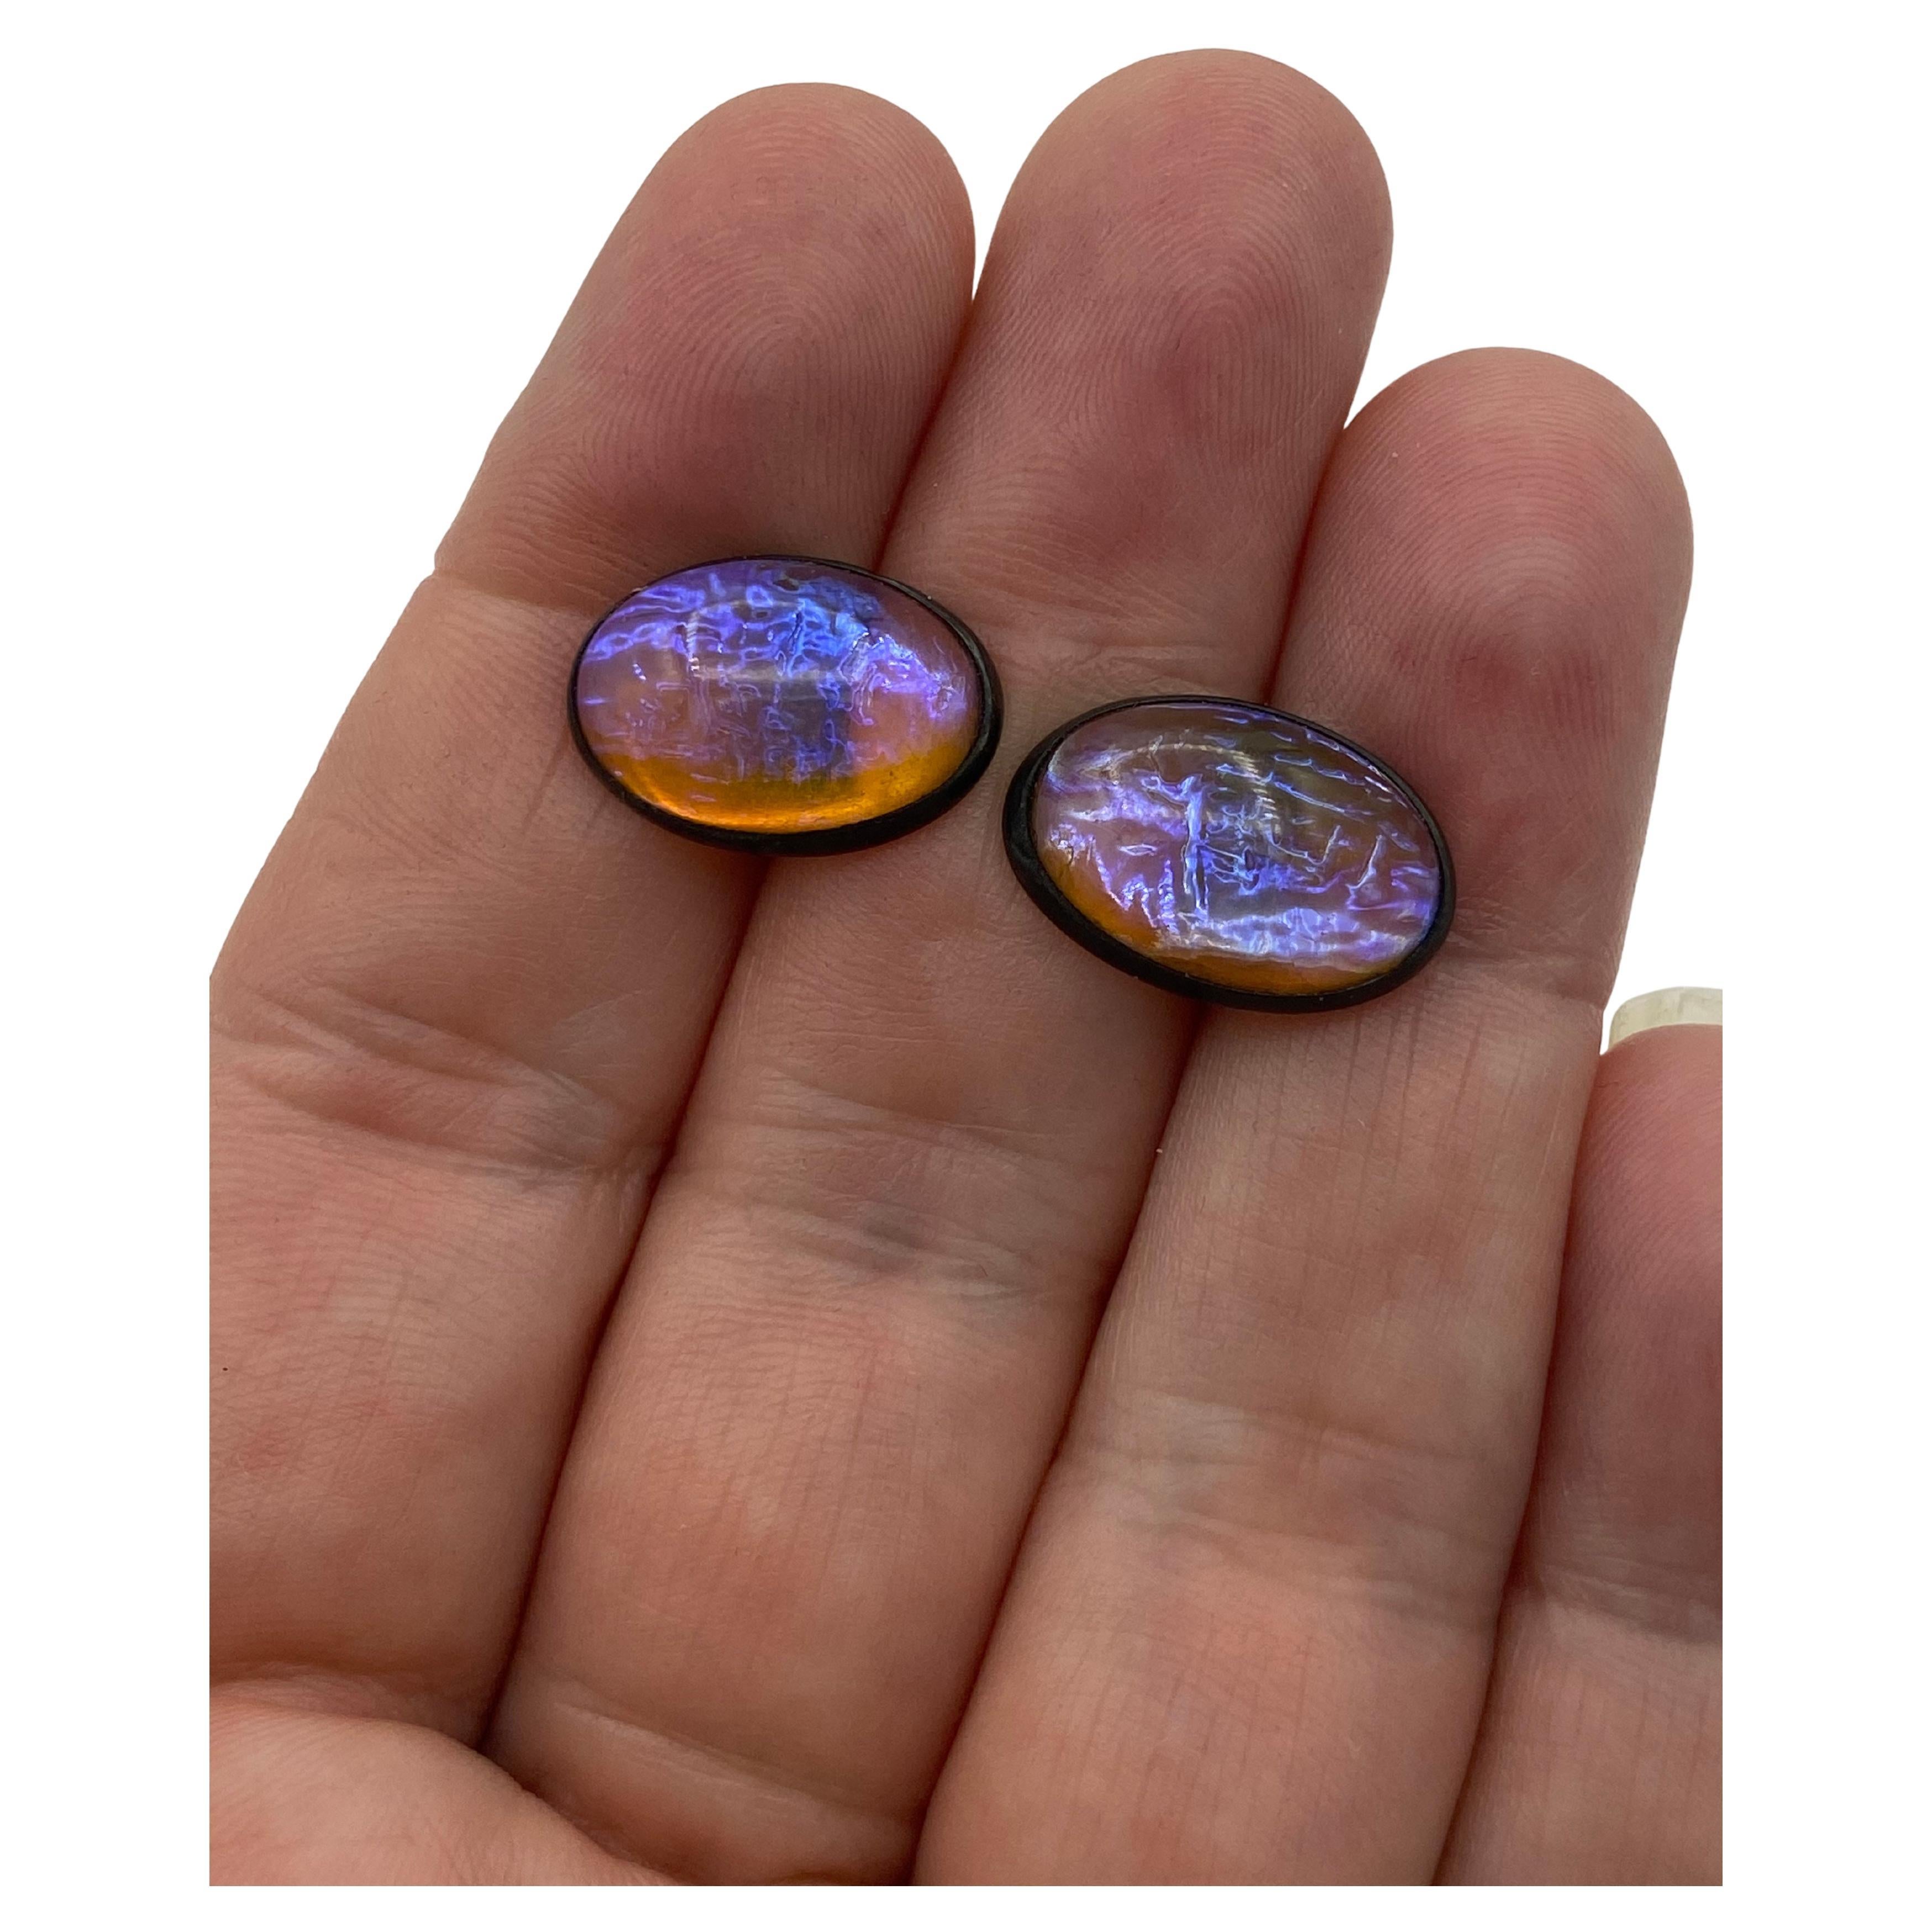 A stunning set of antique jelly opal cufflinks and stick pin in the original box. True antique Jelly Opal art glass, not foil-backed. The oval glass stones are a peachy amber color with a gorgeous violet-blue flash. The jelly opals are set in